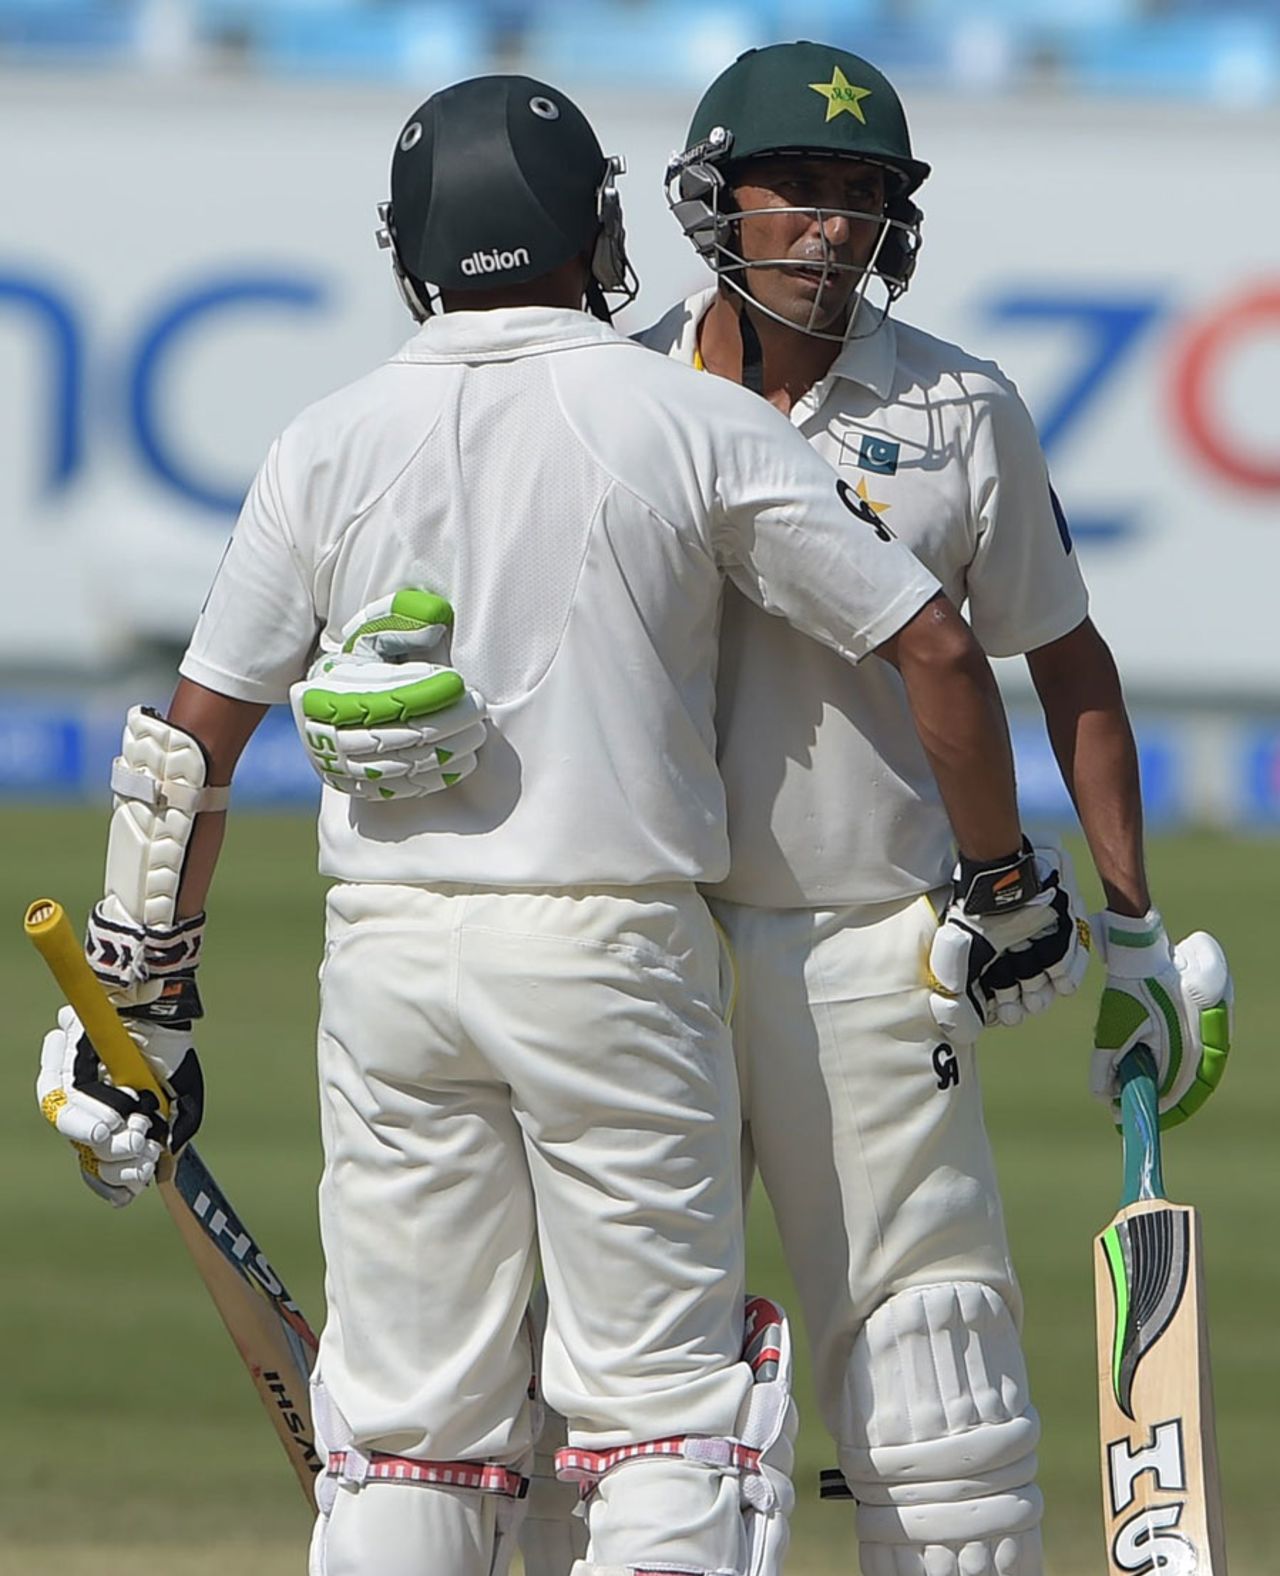 Younis Khan is congratulated by Azhar Ali after reaching his fifty, Pakistan v New Zealand, 2nd Test, Dubai, 3rd day, November 19, 2014